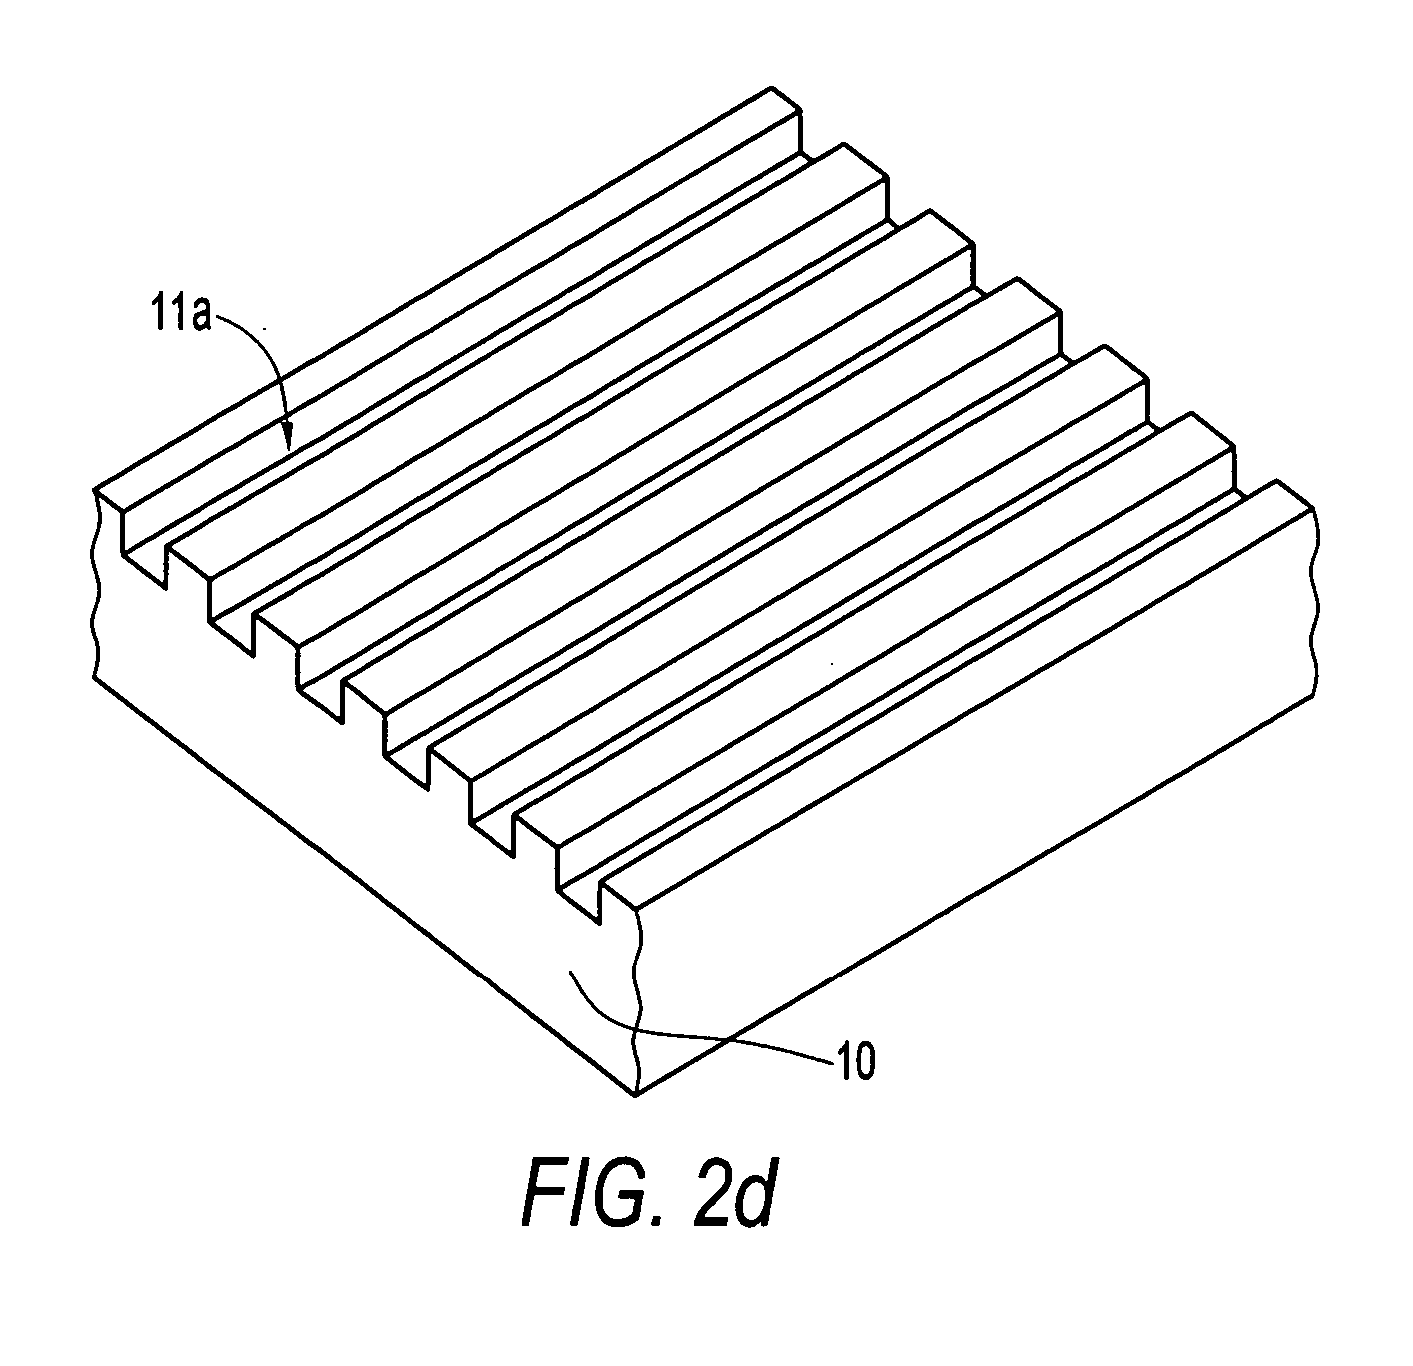 Buried dielectric slab structure for CMOS imager